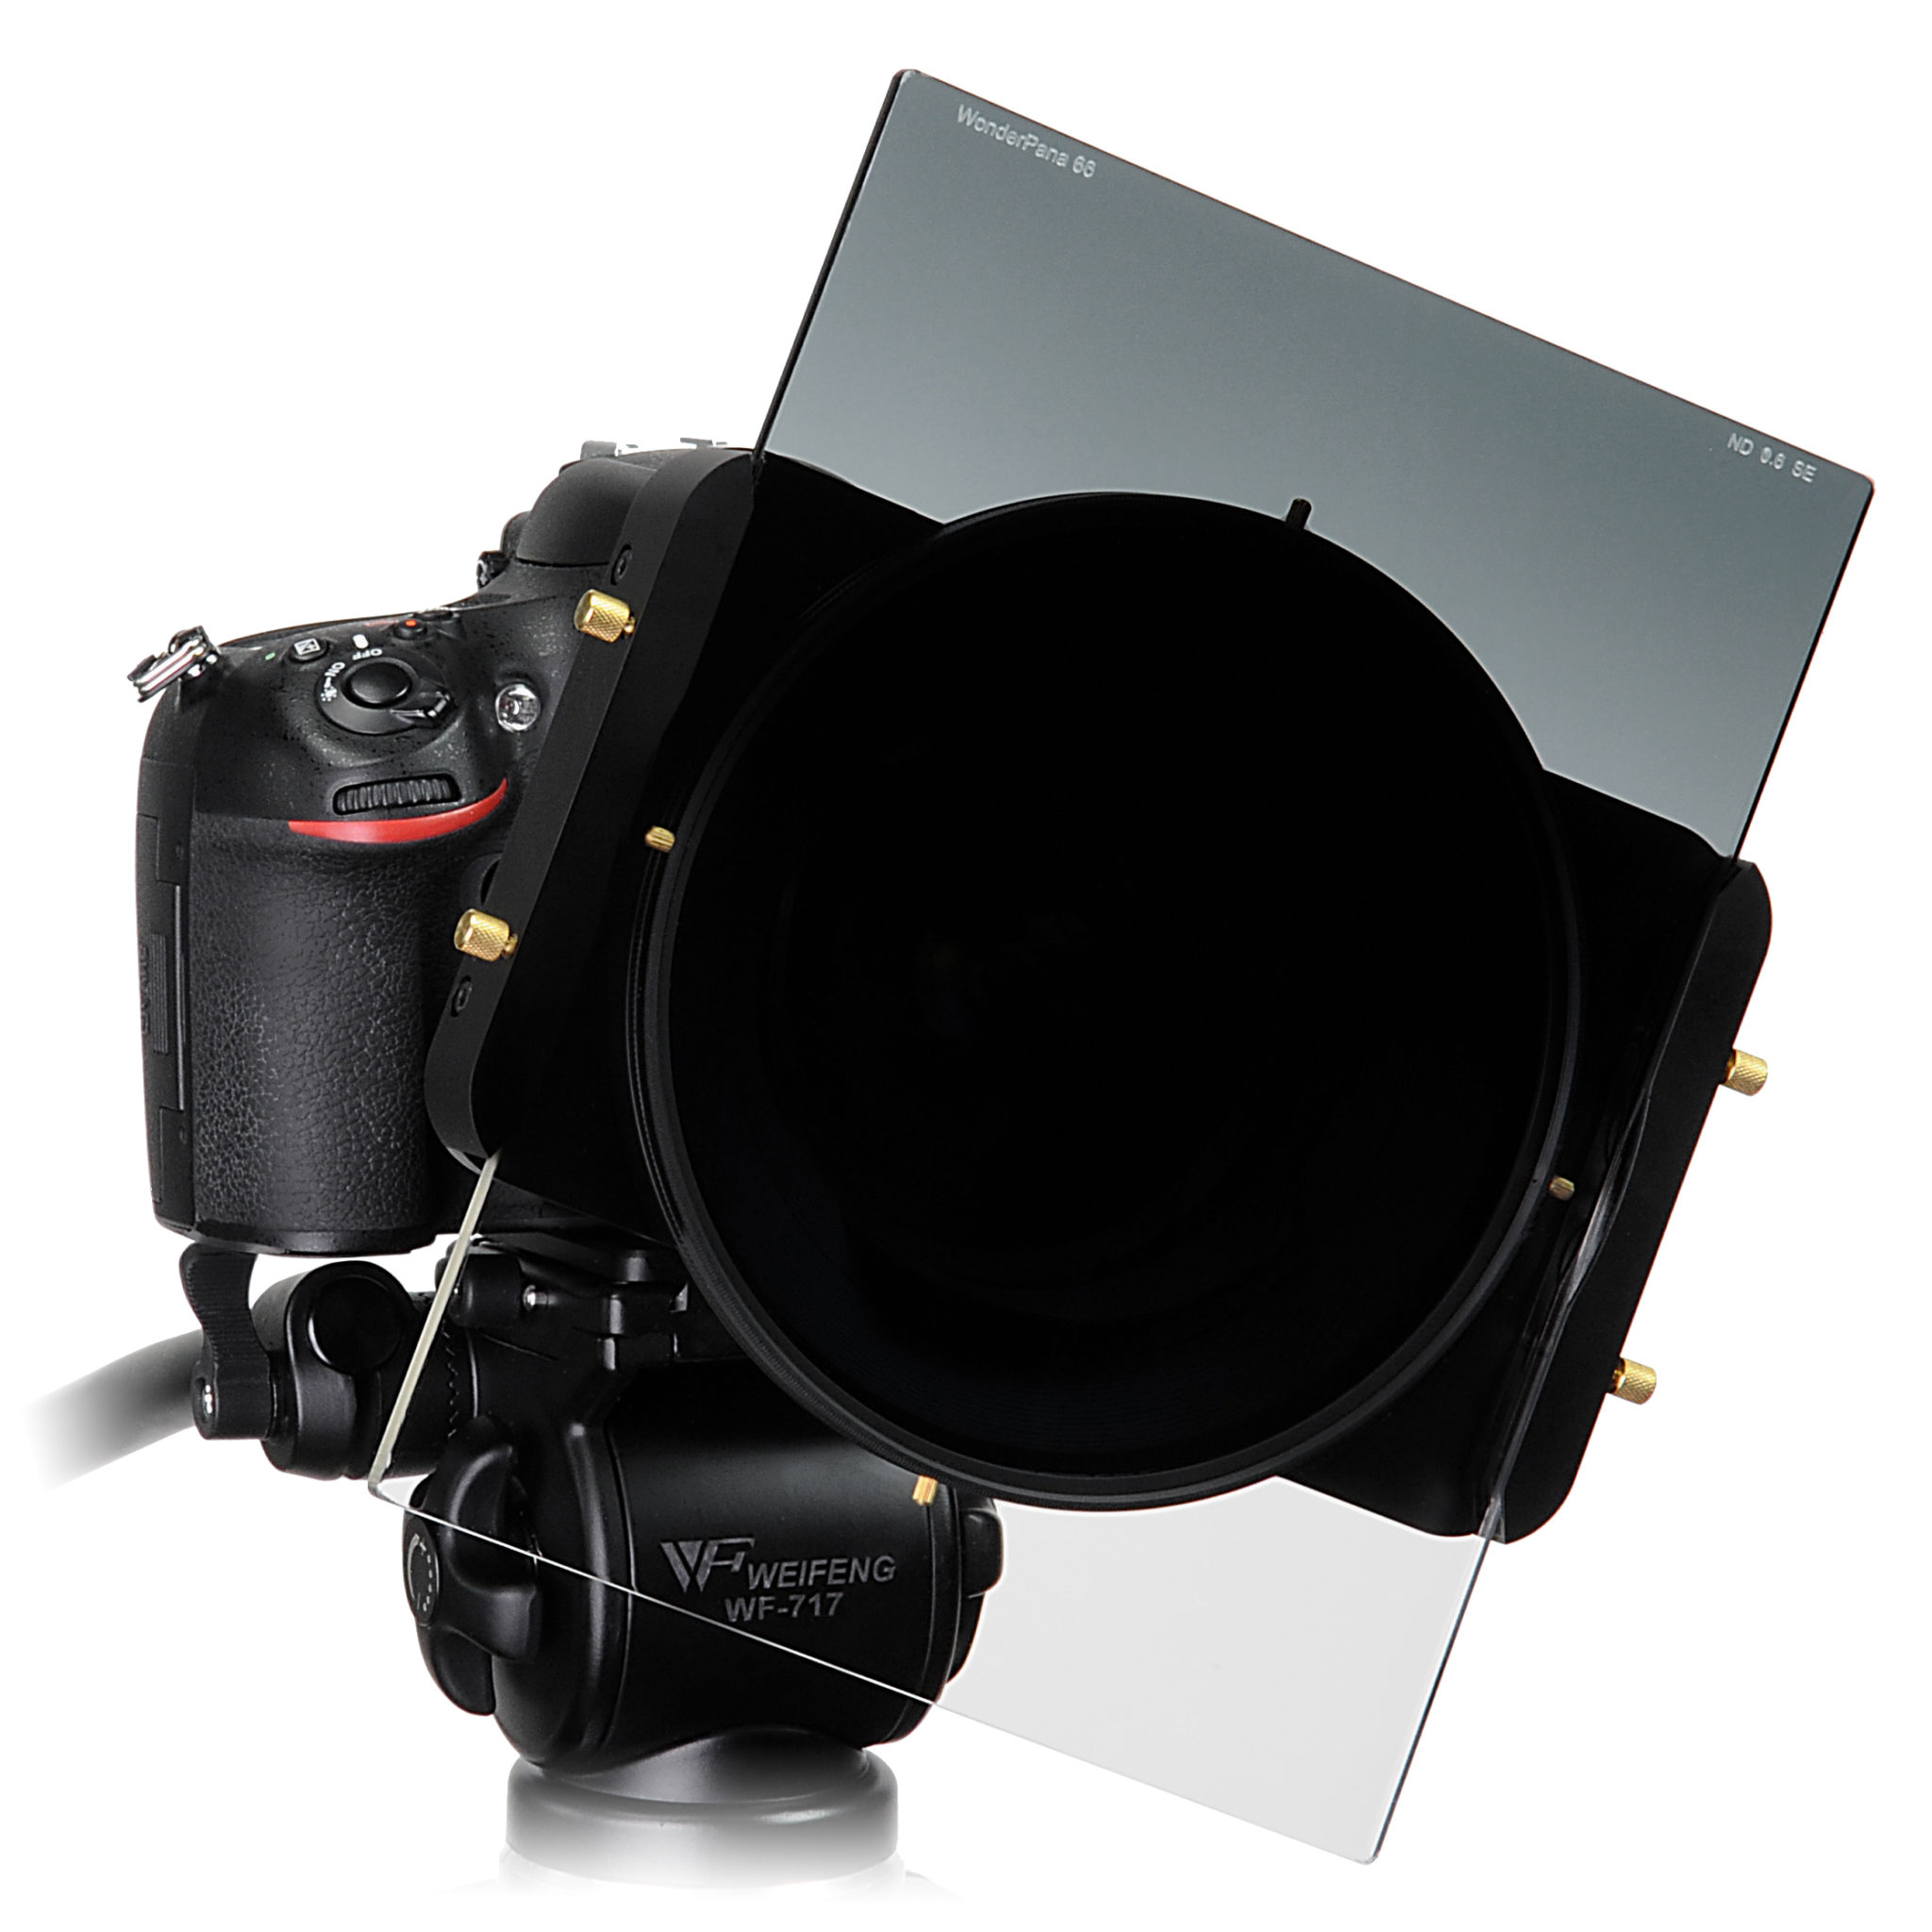 FotoDiox's WonderPana FreeArc is Designed for the Nikon 14-24mm Lens ...